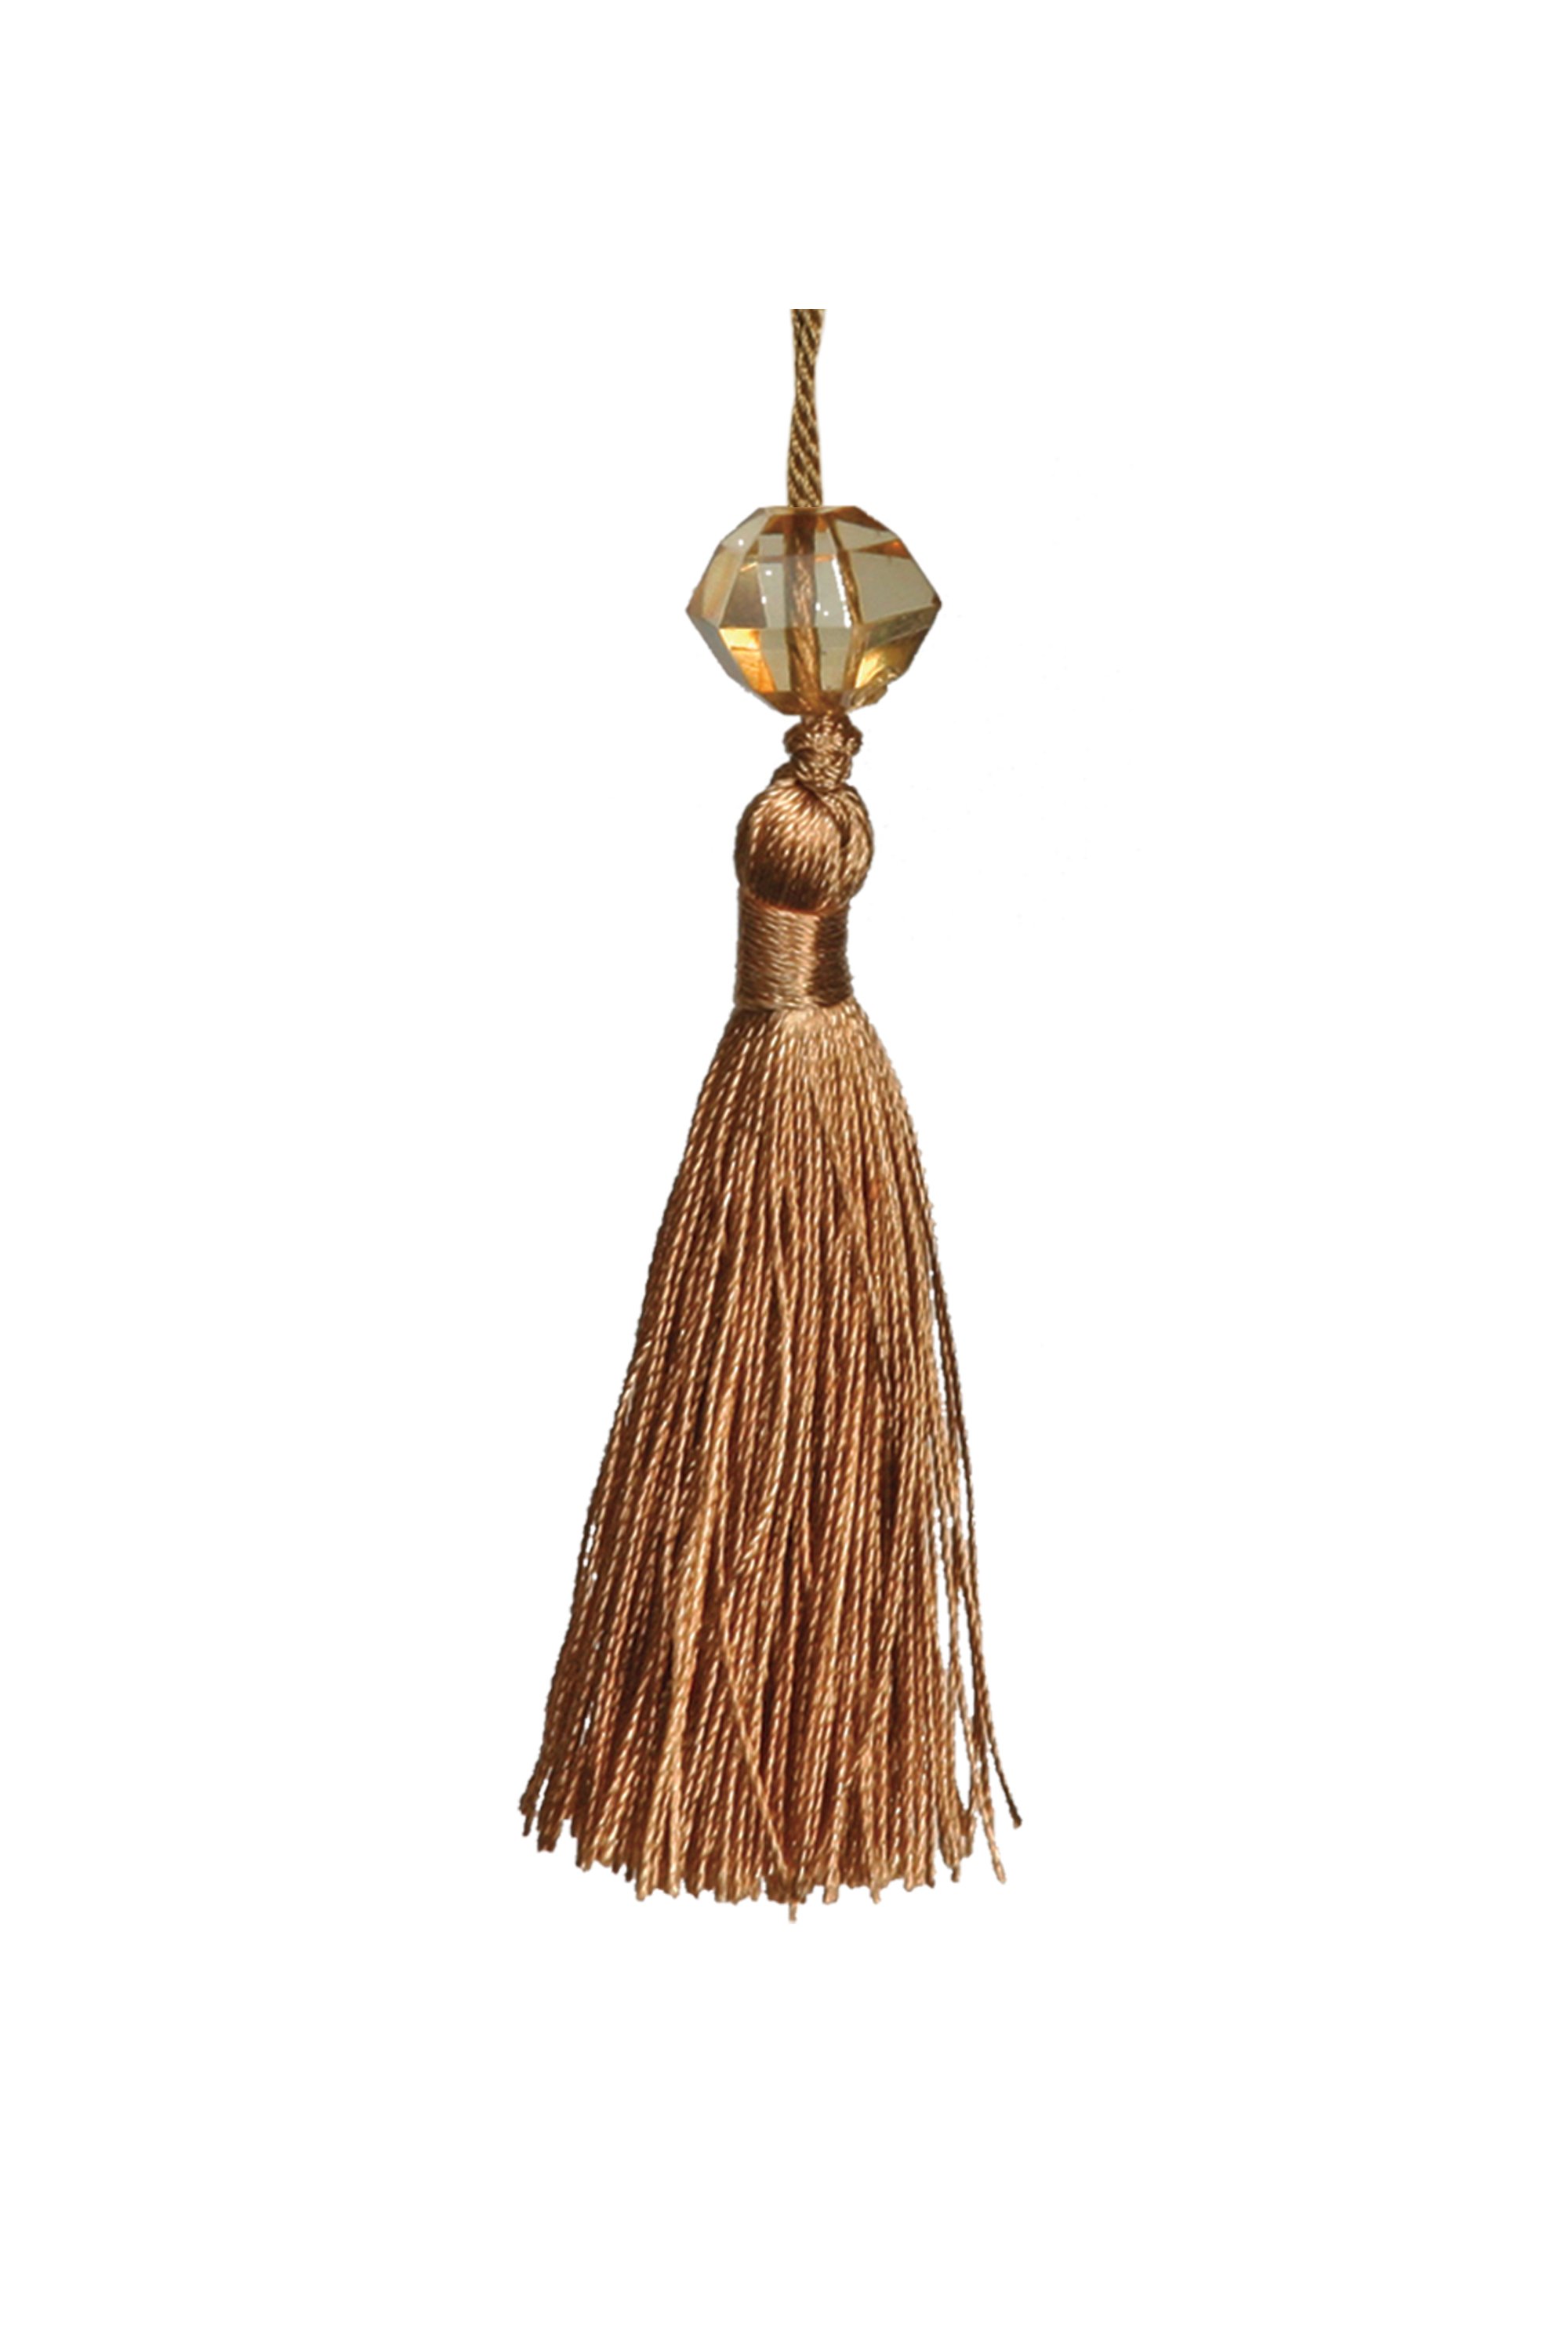 Small Tassel with Bead - Gold 6.5cm Pack of 5